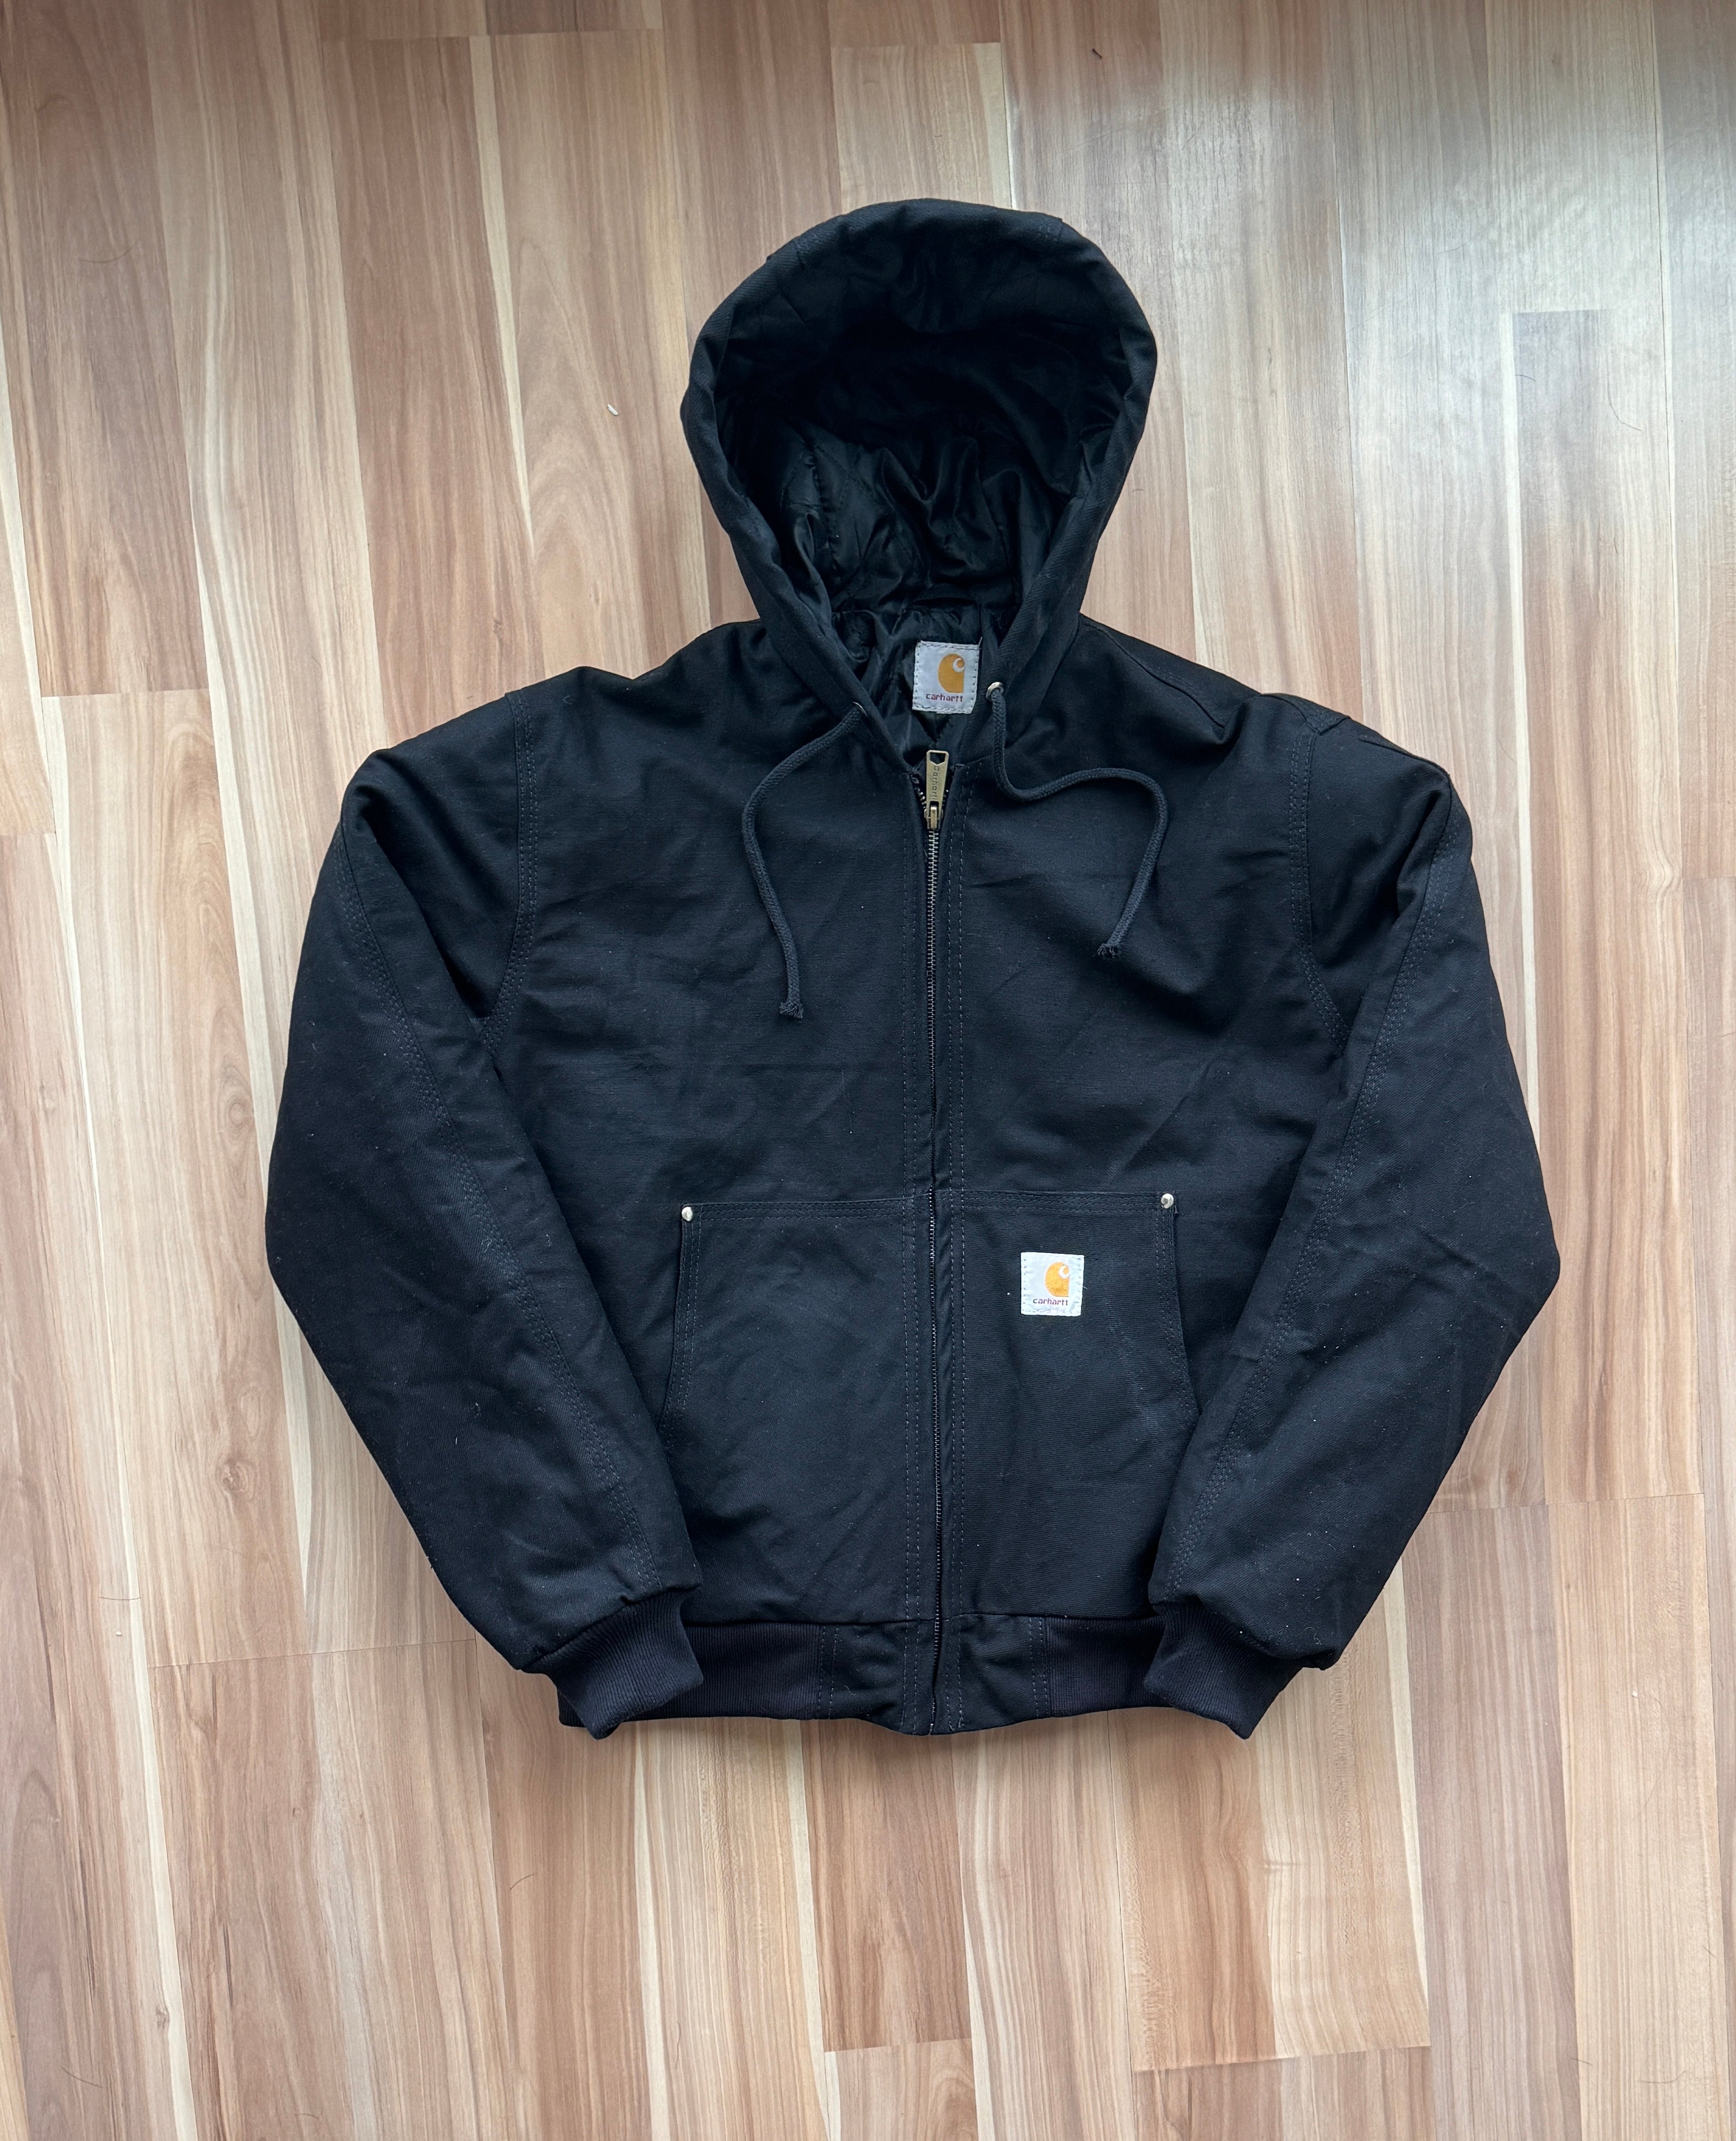 Carhartt Hooded Reworked Jacket - Small, Medium & Large Available ...